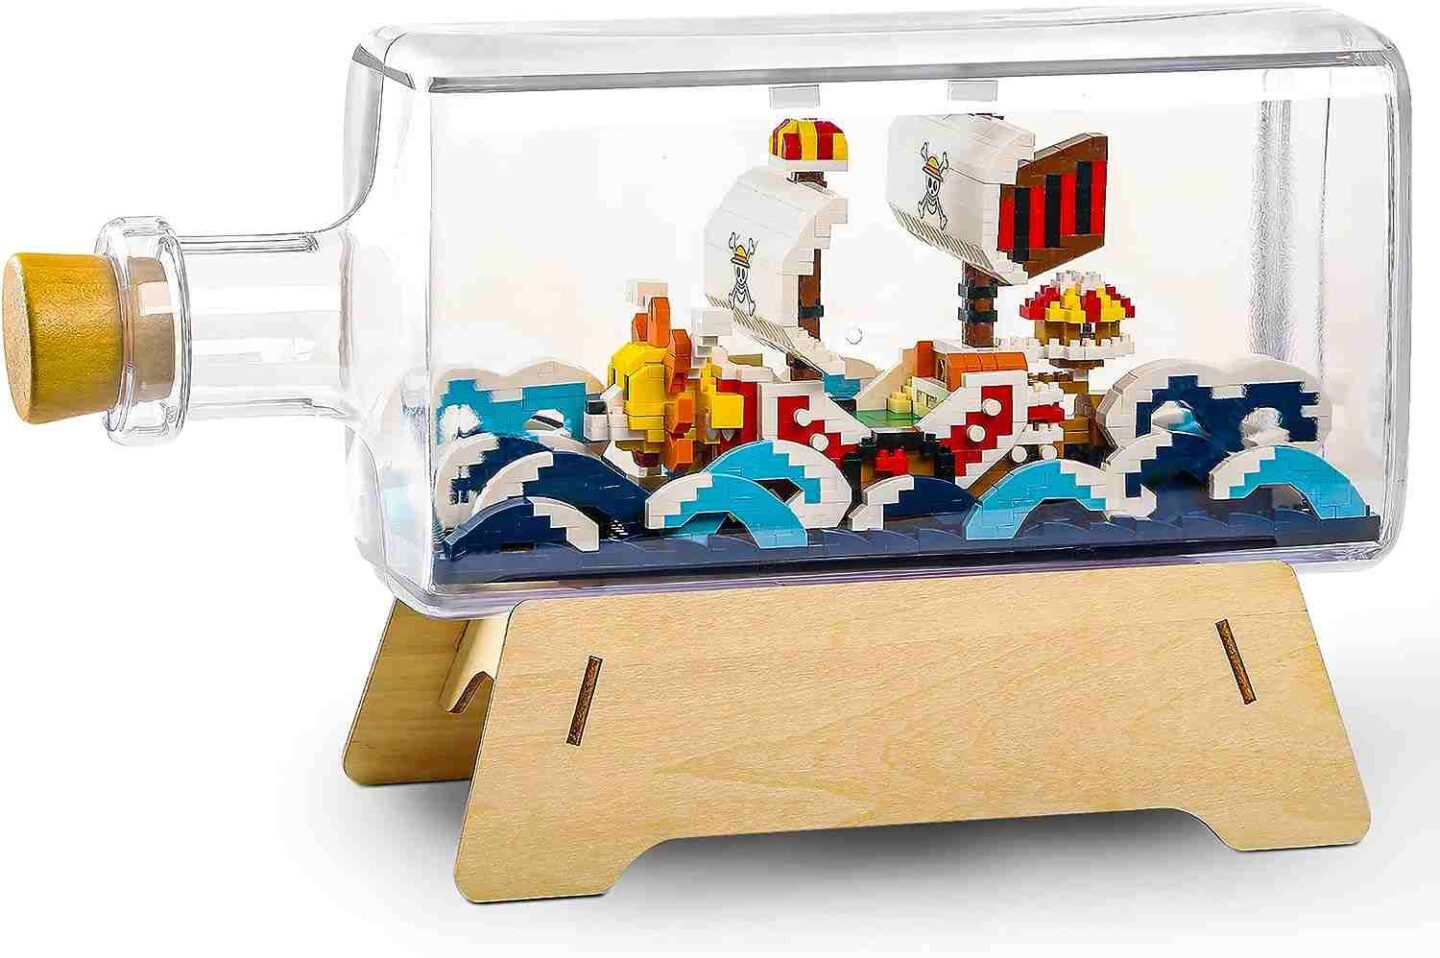 One Piece Thousand Sunny Ship in a Bottle Micro Building Blocks Set